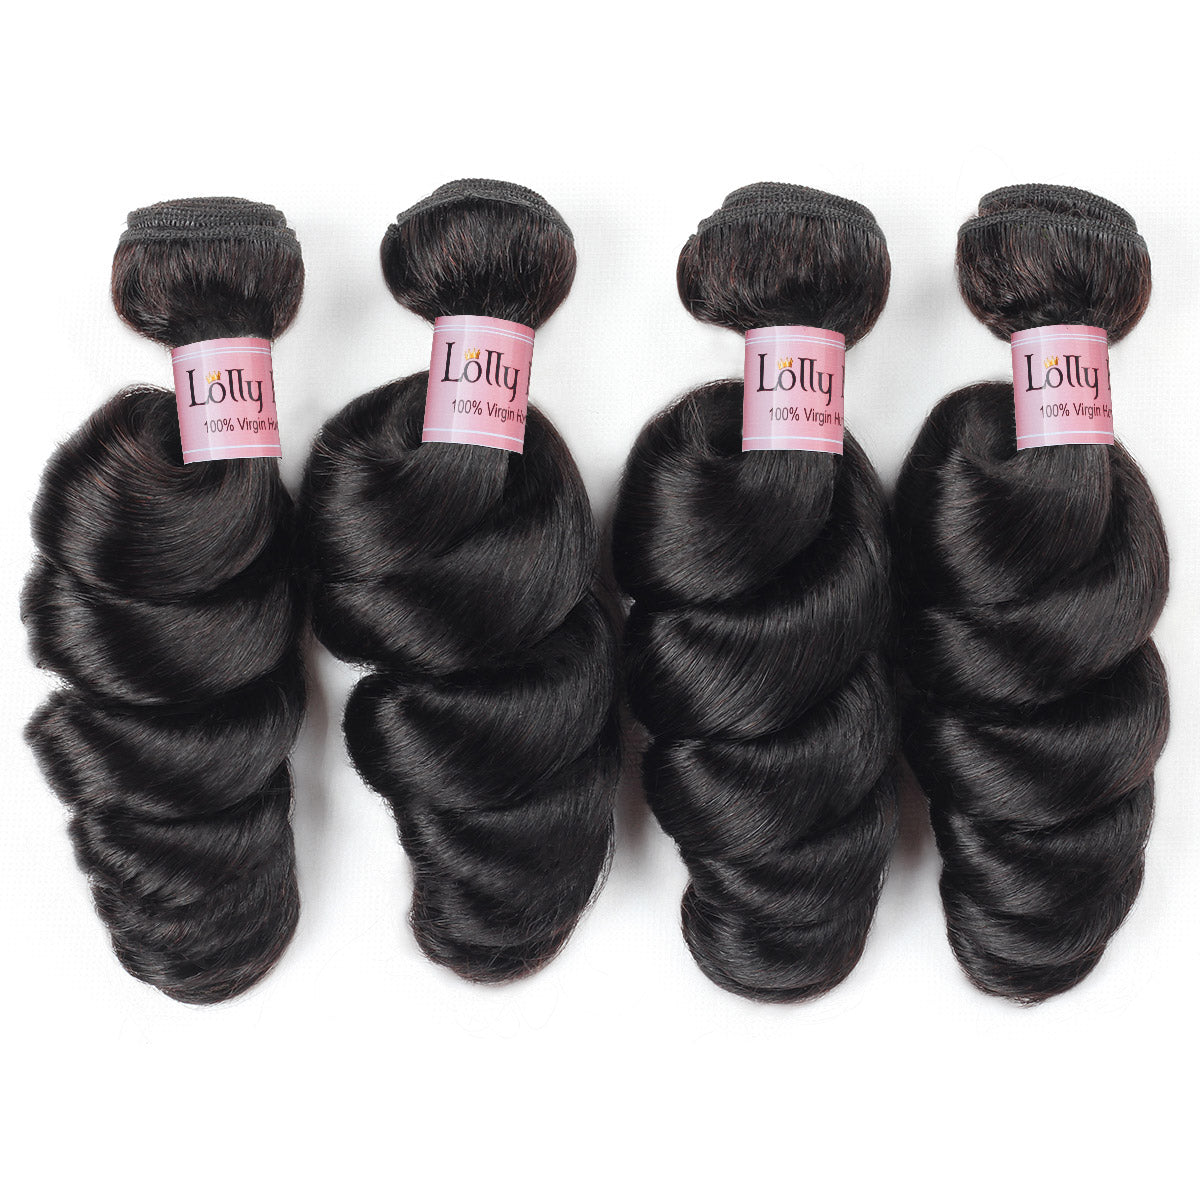 Lolly Loose Wave Hair Extensions 4 Bundles 